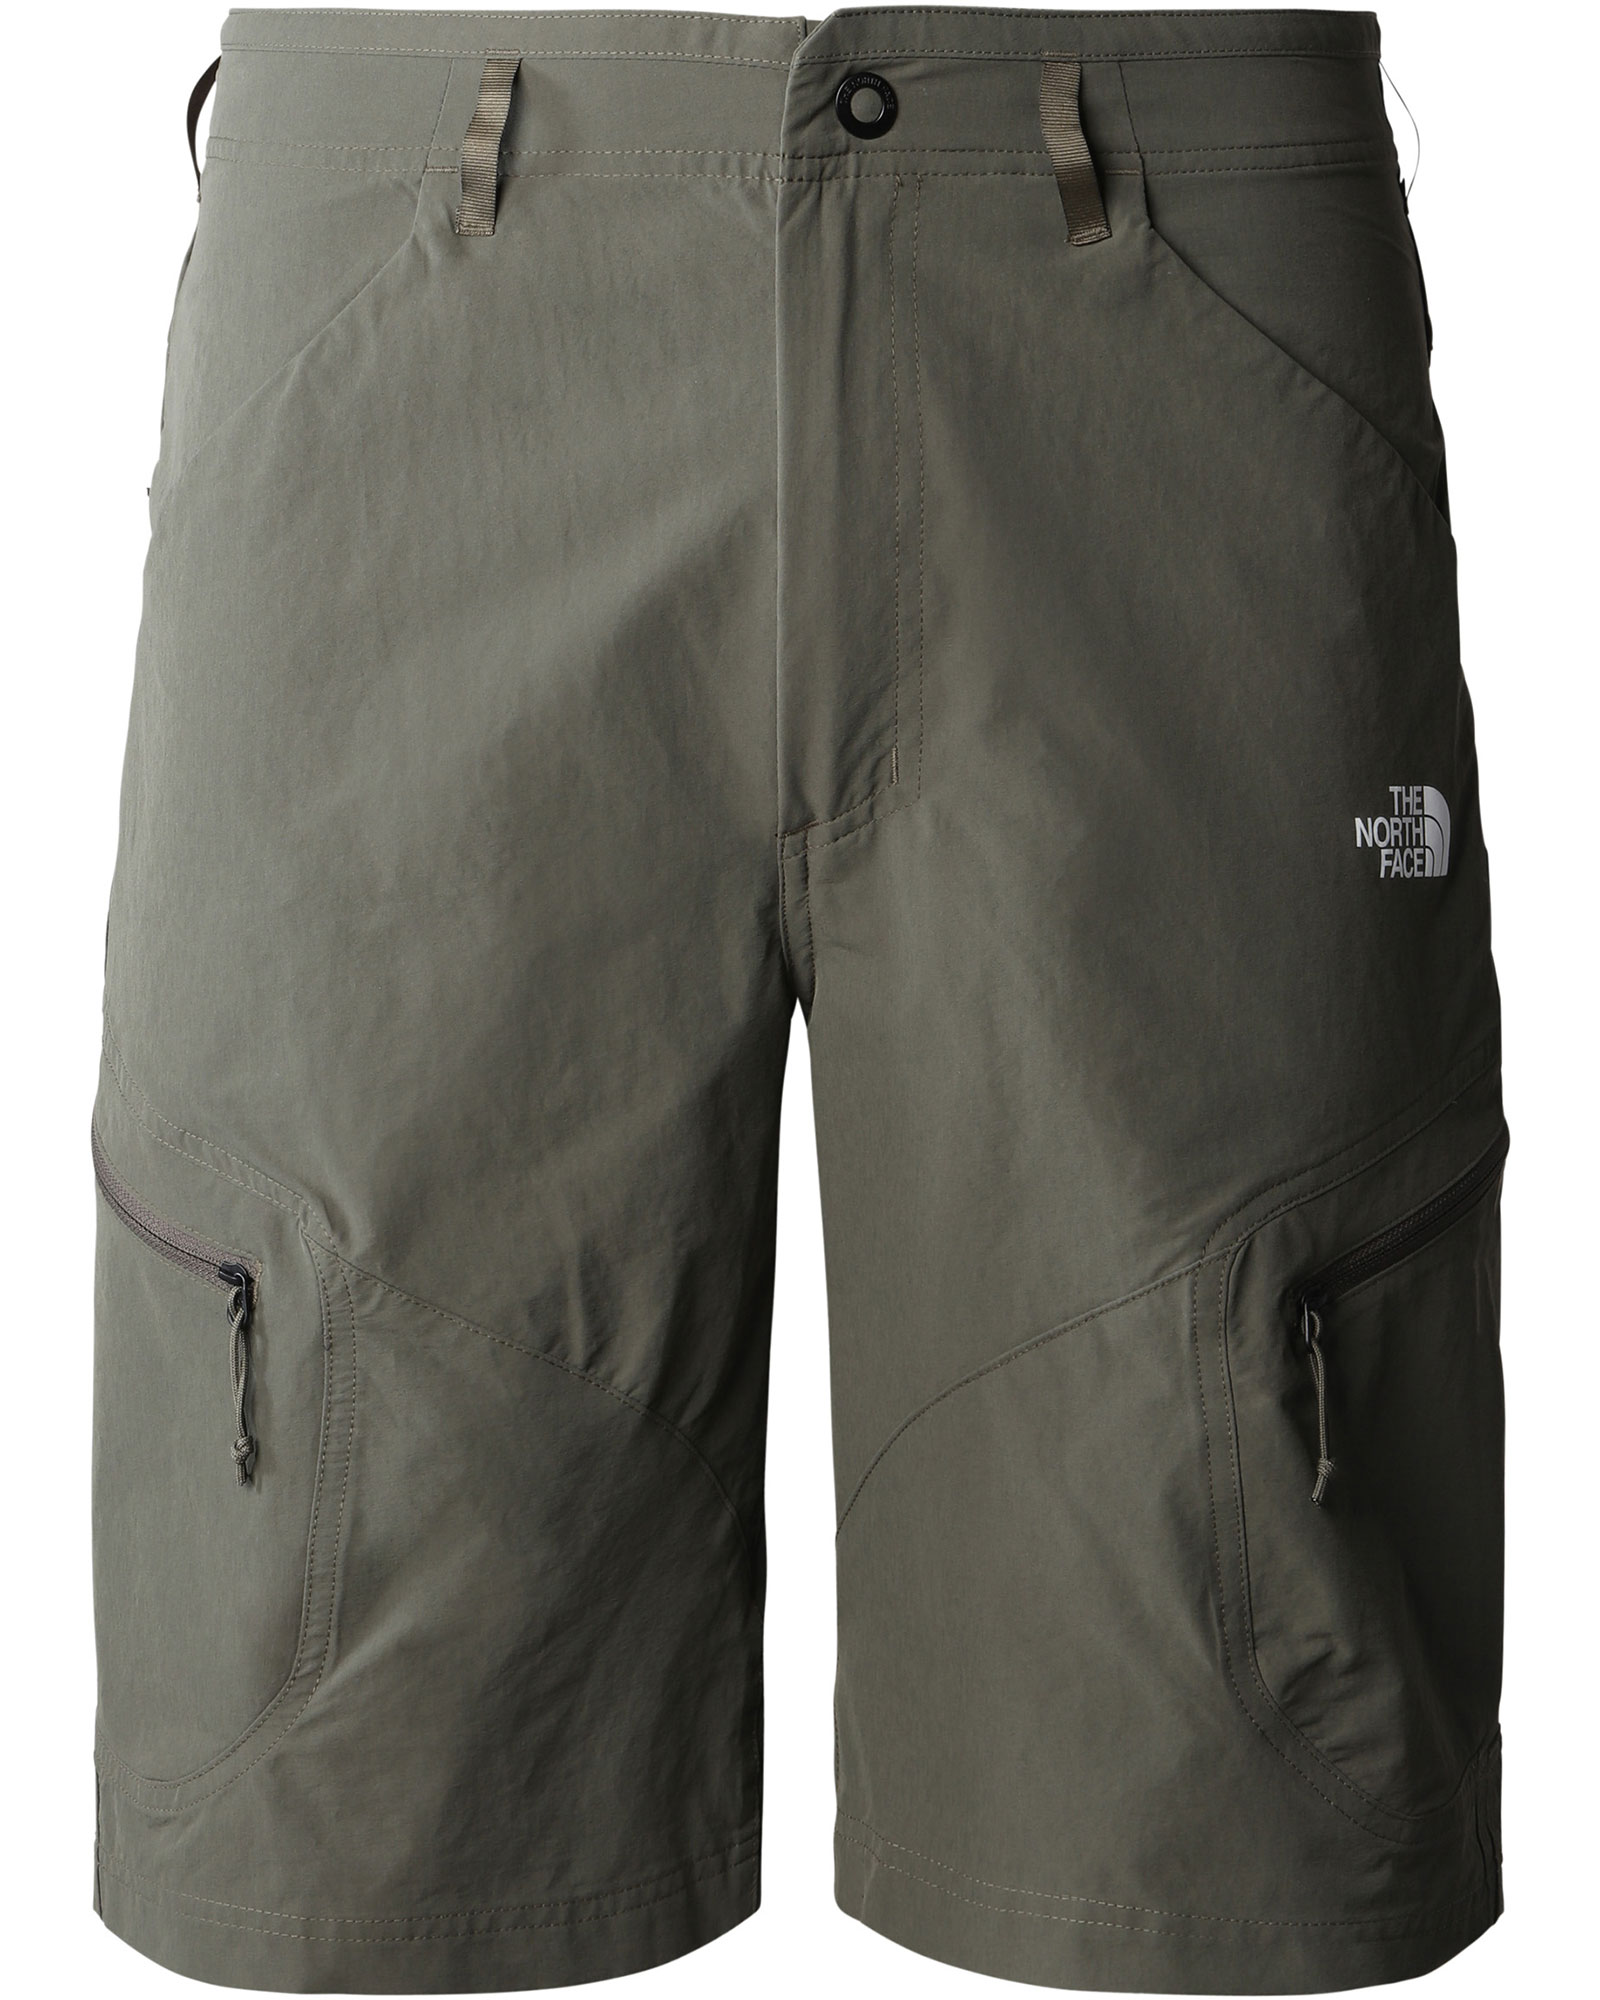 The North Face Men’s Exploration Shorts - New Taupe Green EU 32